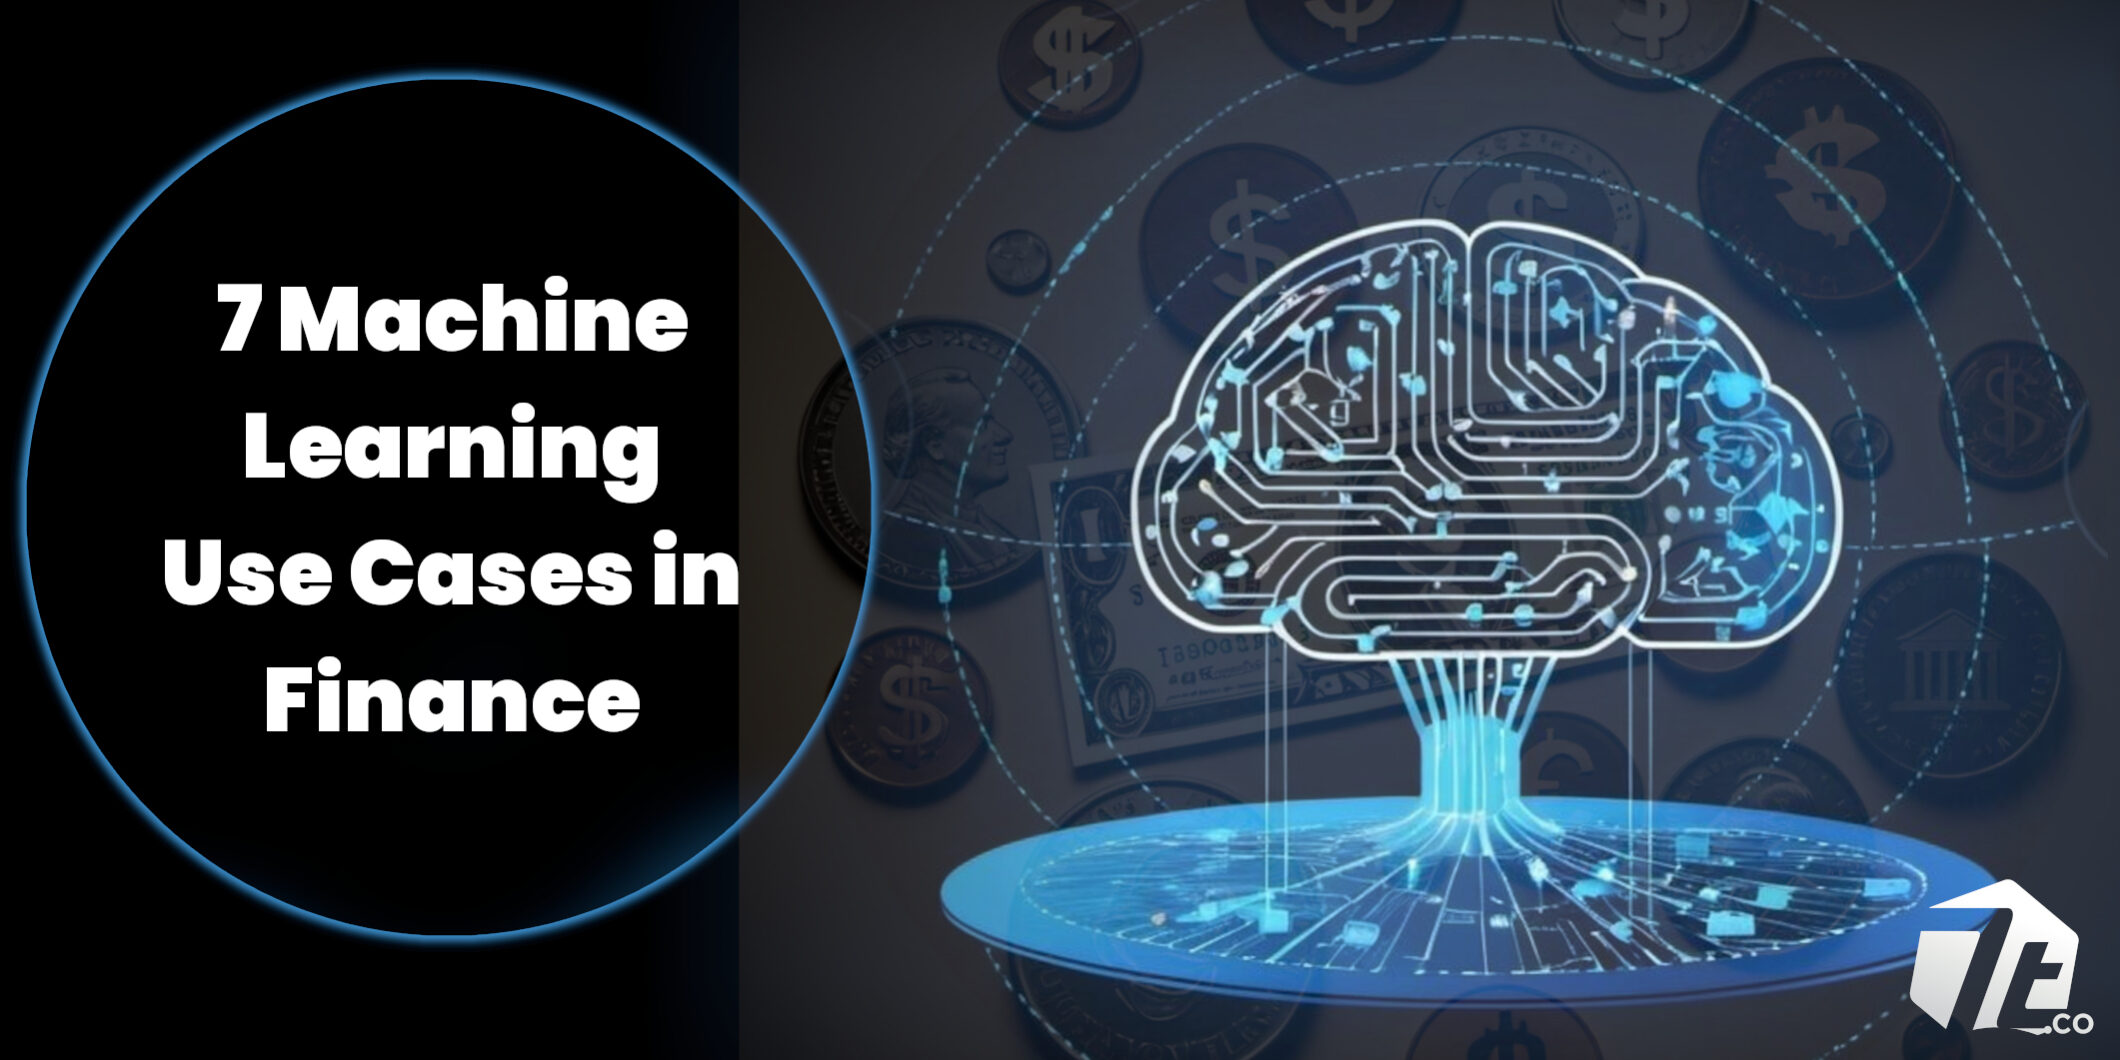 7 Machine Learning Use Cases in Finance